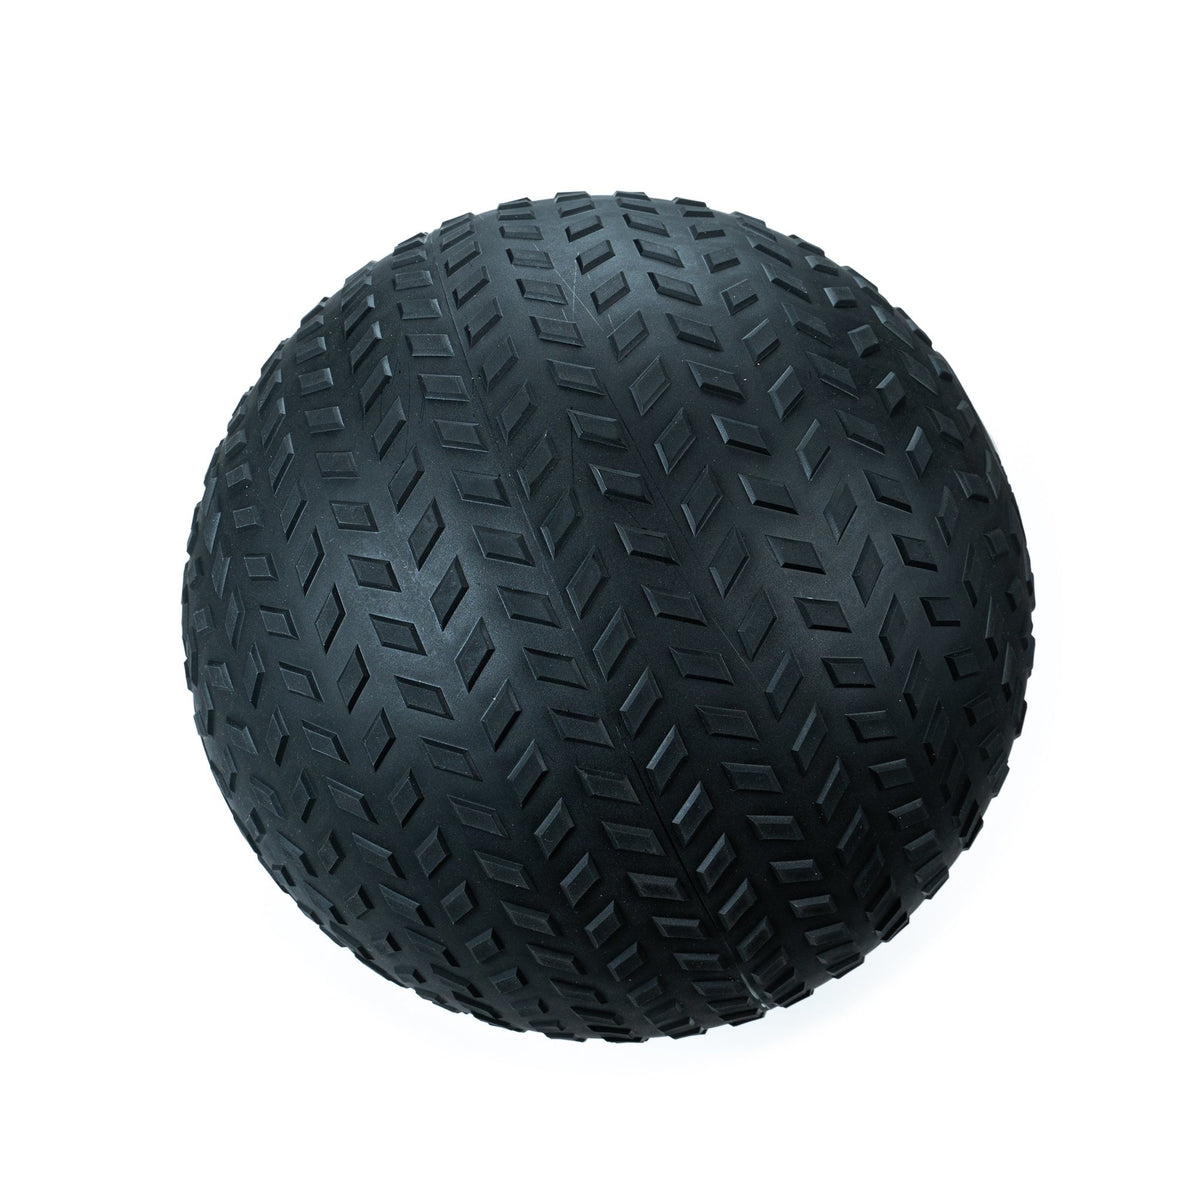 FitWay Equip. Max Grip Slam Ball - 35 Lbs